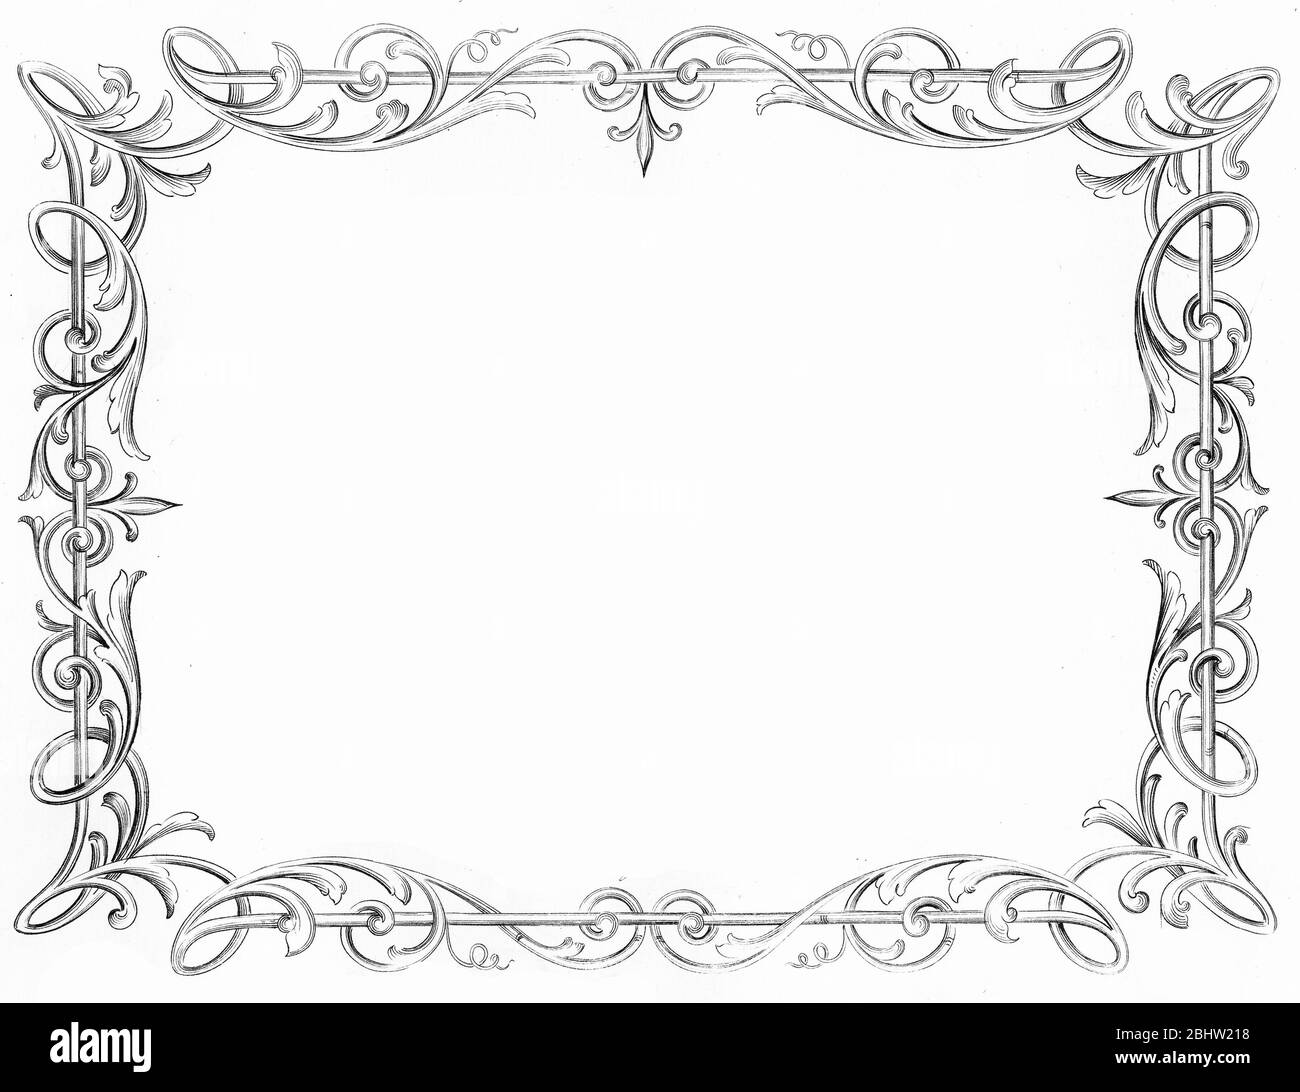 Victorian Art Ornate Scroll Frame On White Stock Photo, Picture